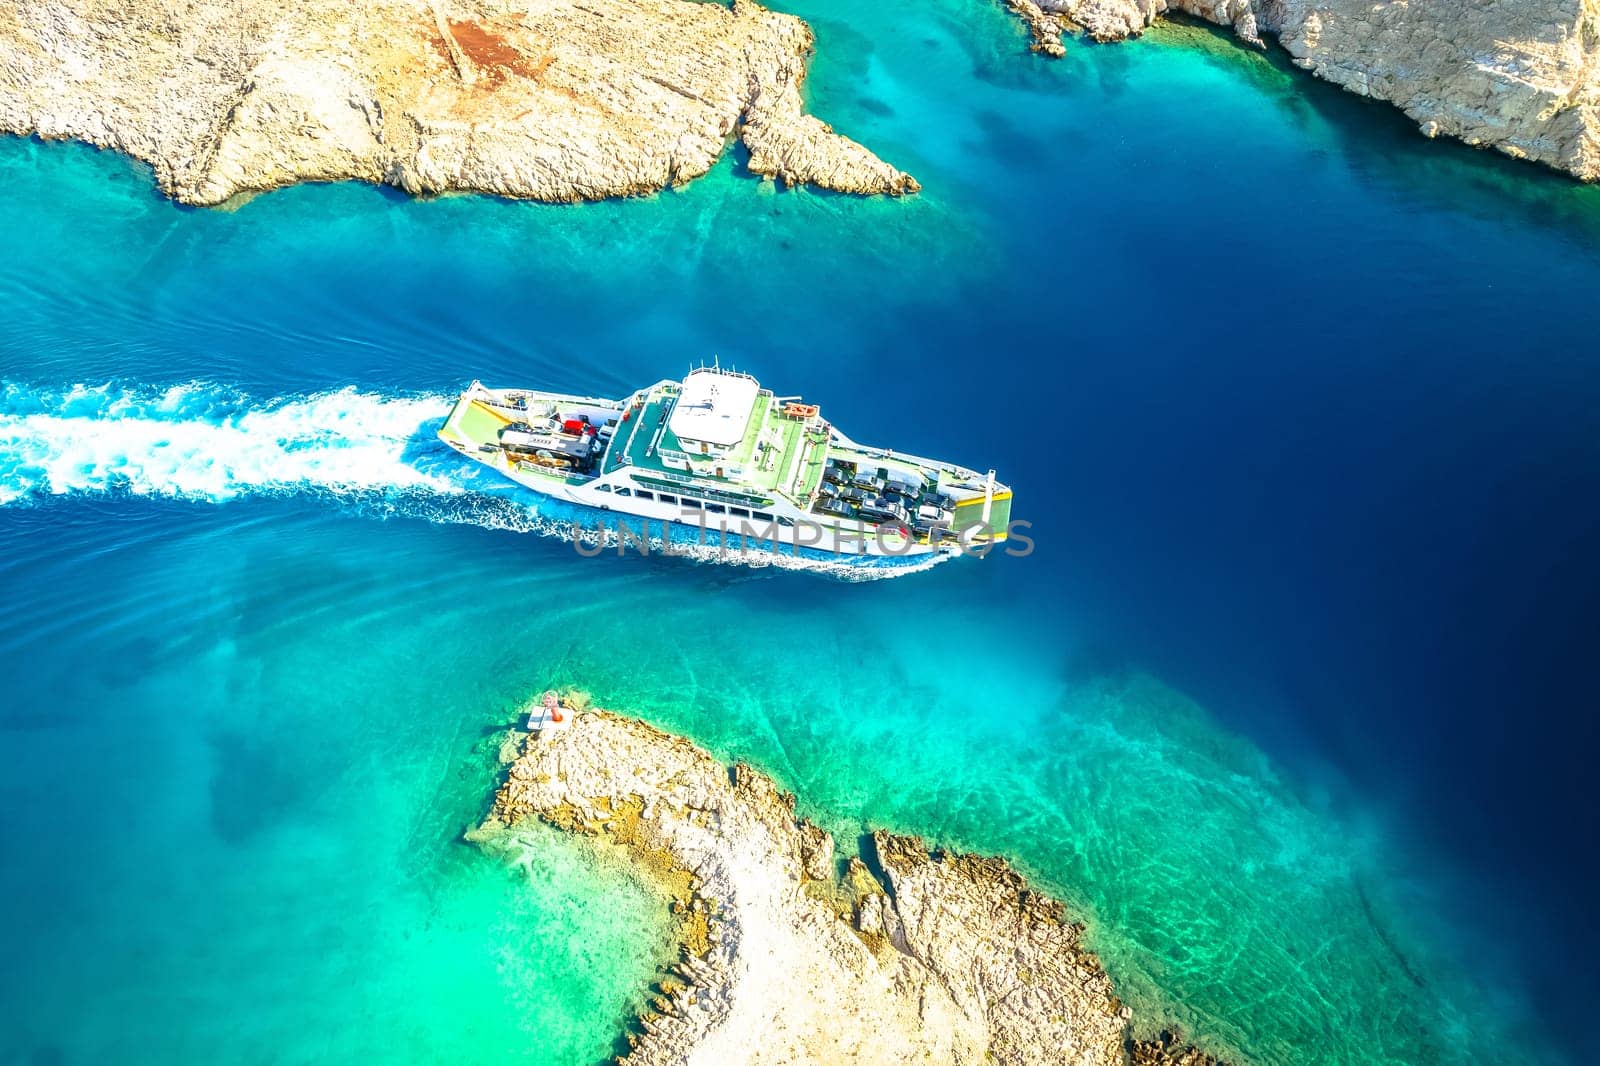 Rab island ferry boat in narrow stone desert passage aerial view by xbrchx